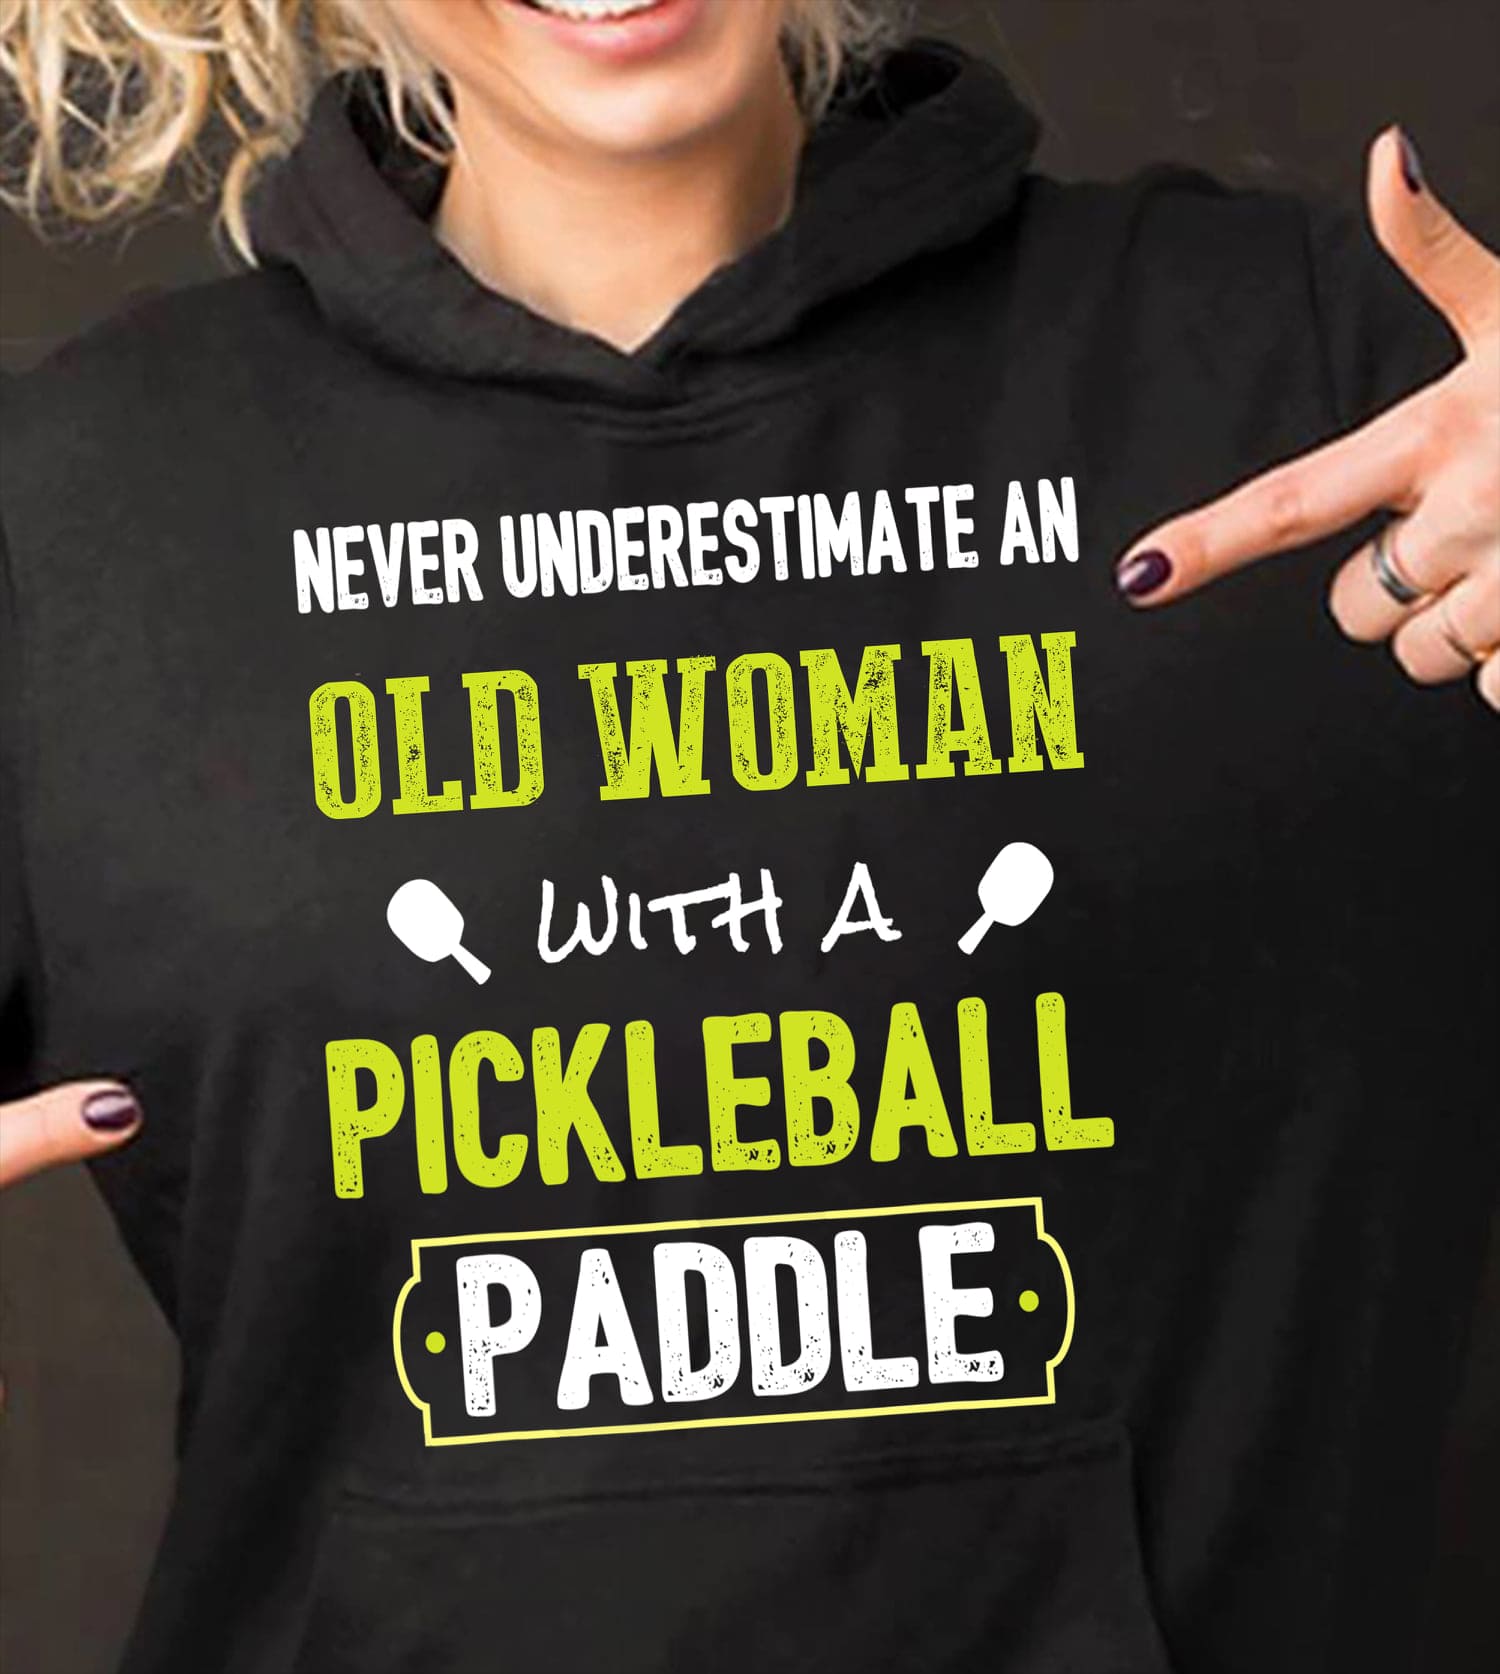 Never underestimate an old woman with a pickleball paddle - Pickleball player T-shirt